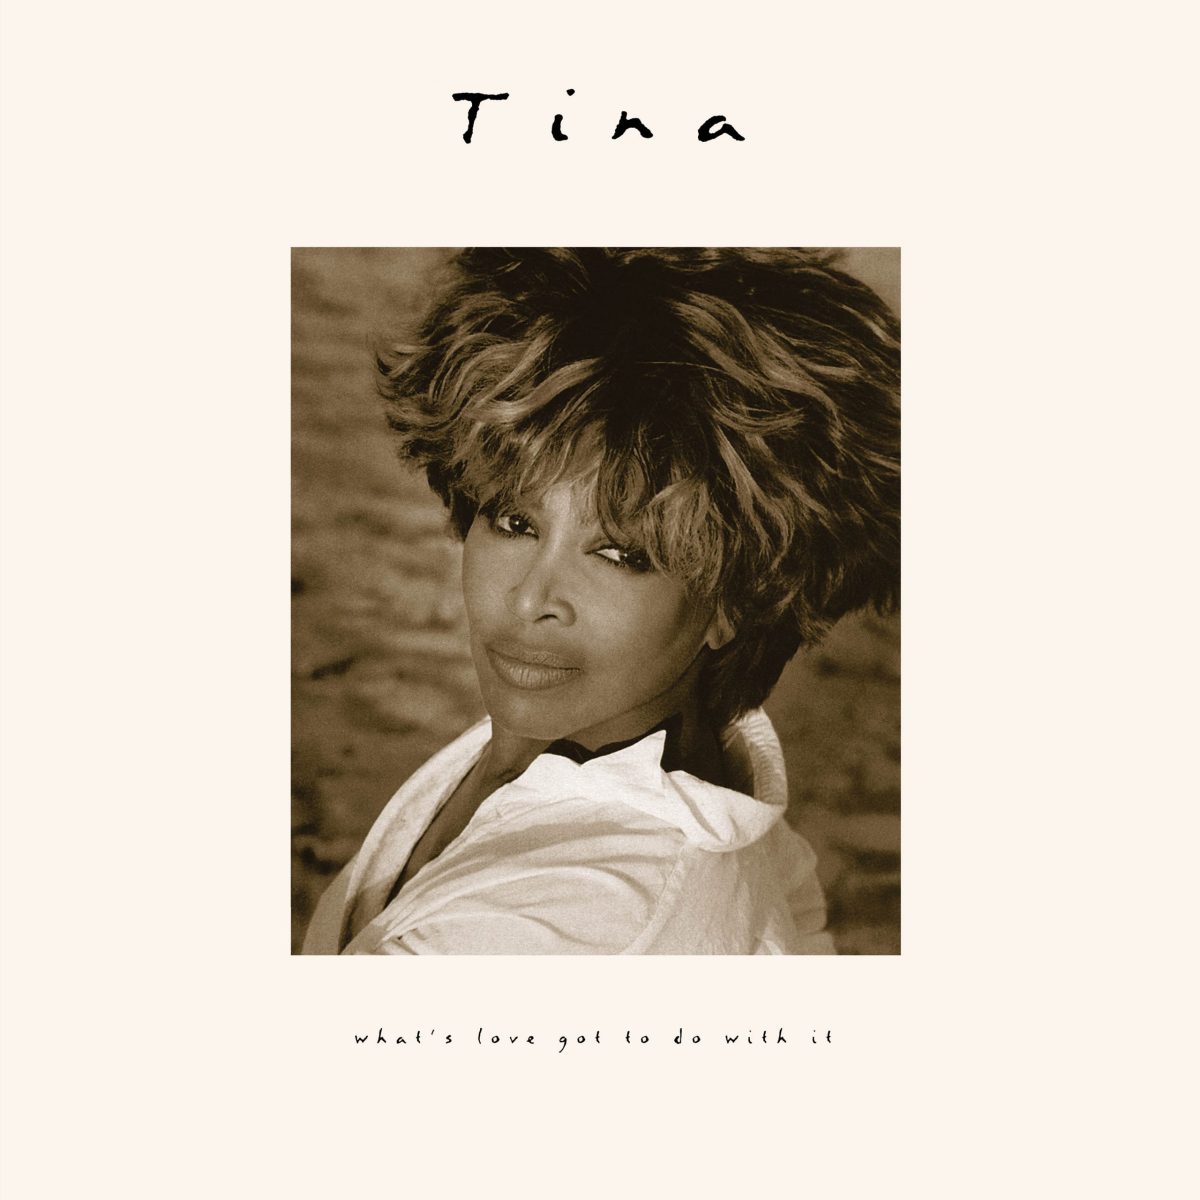 Tina Turner album gets 30th anniversary makeover The Droitwich Standard